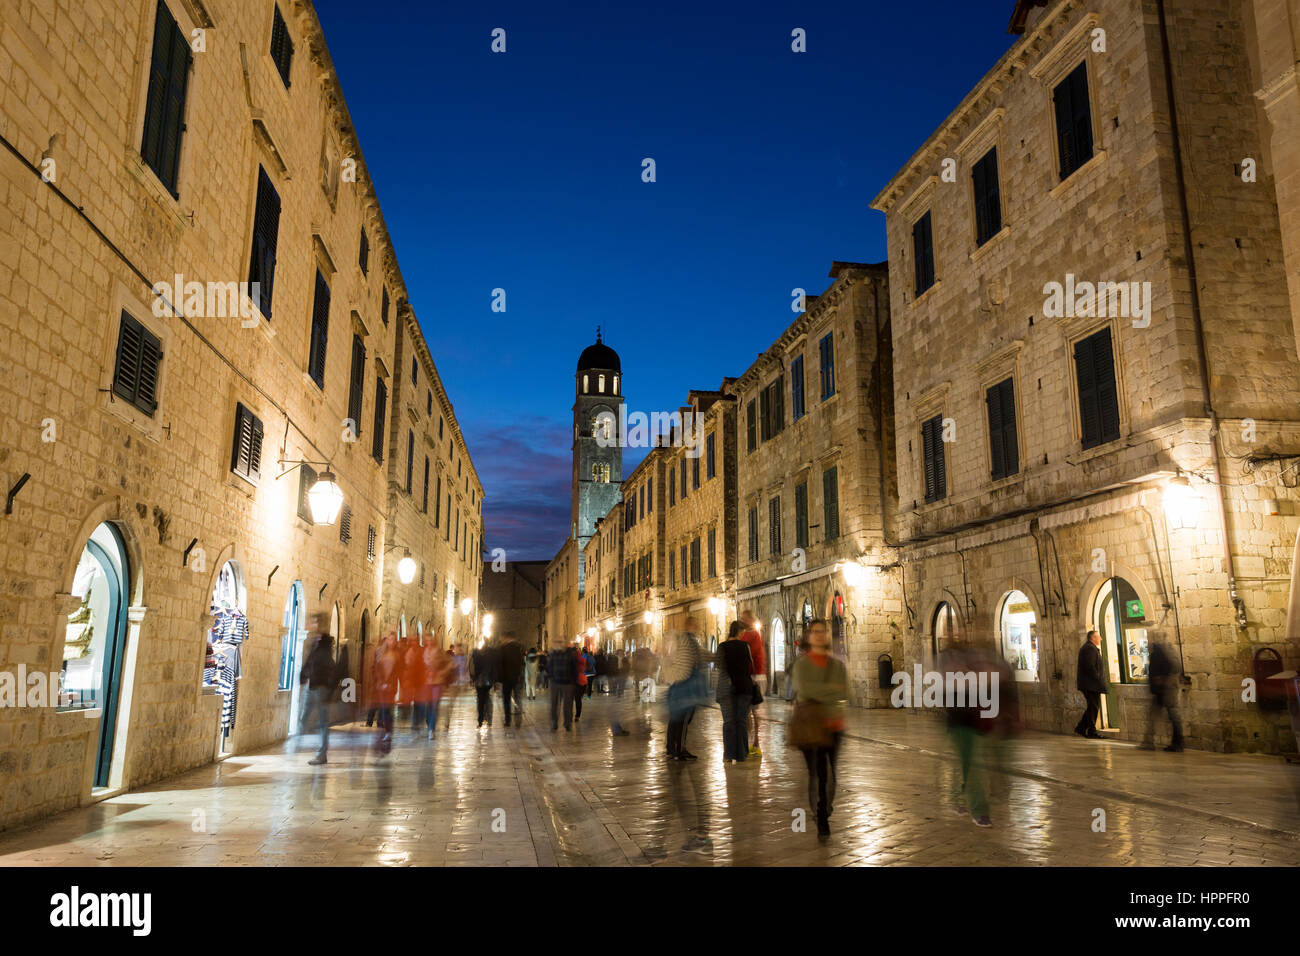 Stradun in the old town of Dubrovnik, Croatia in the blue hour after sunset Stock Photo